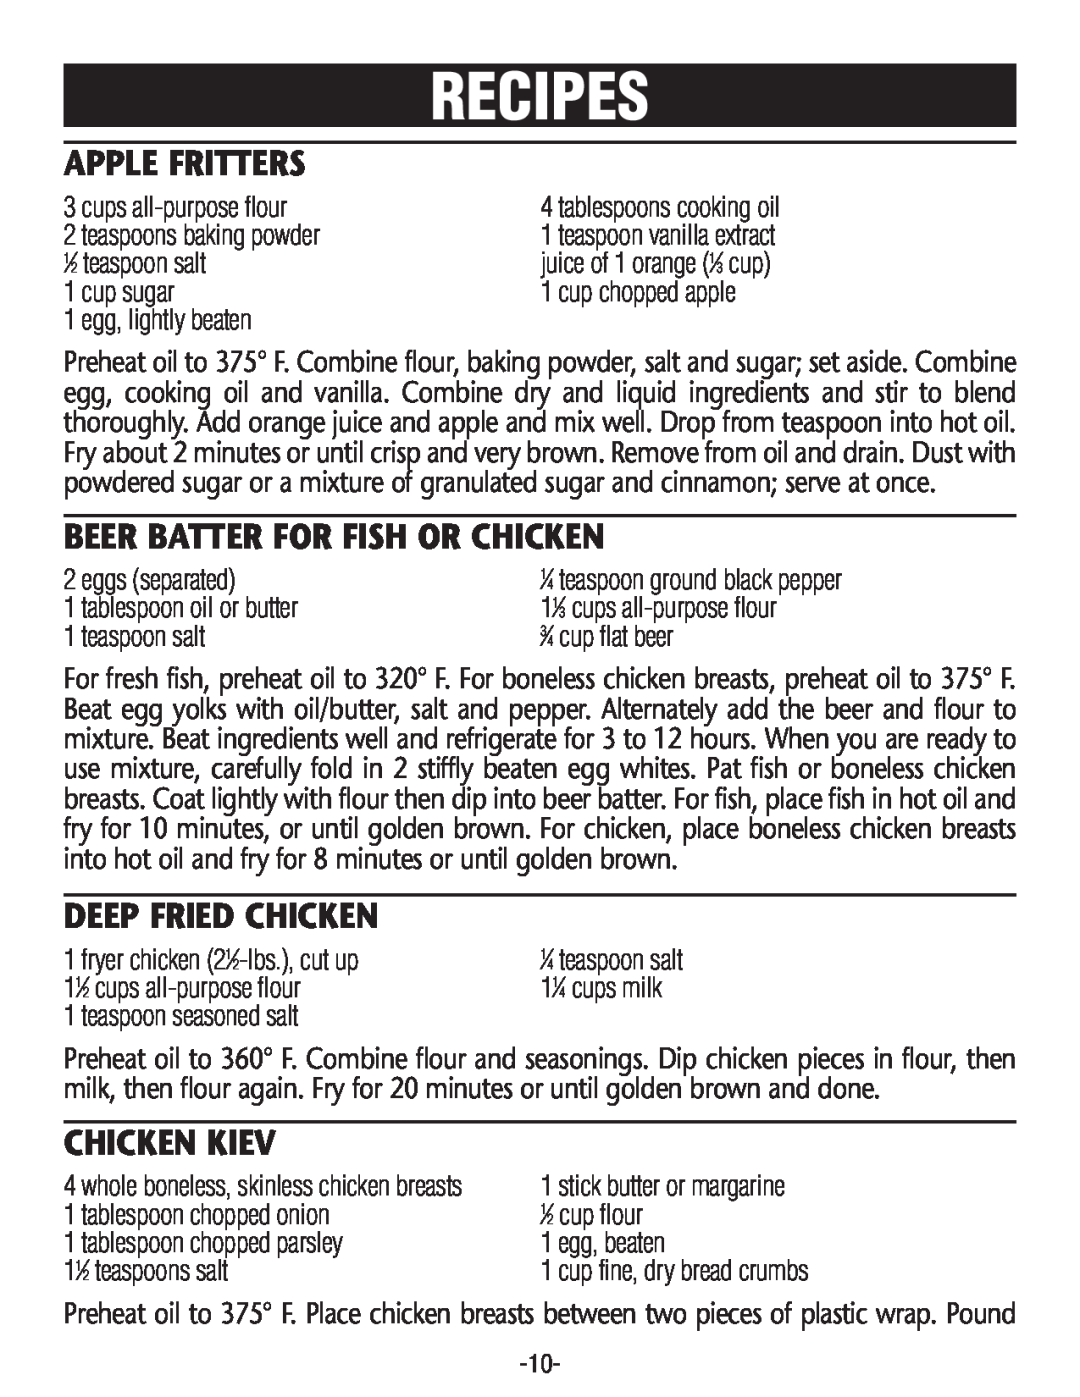 Rival CF106-W manual Recipes, Apple Fritters, Beer Batter For Fish Or Chicken, Deep Fried Chicken, Chicken Kiev 